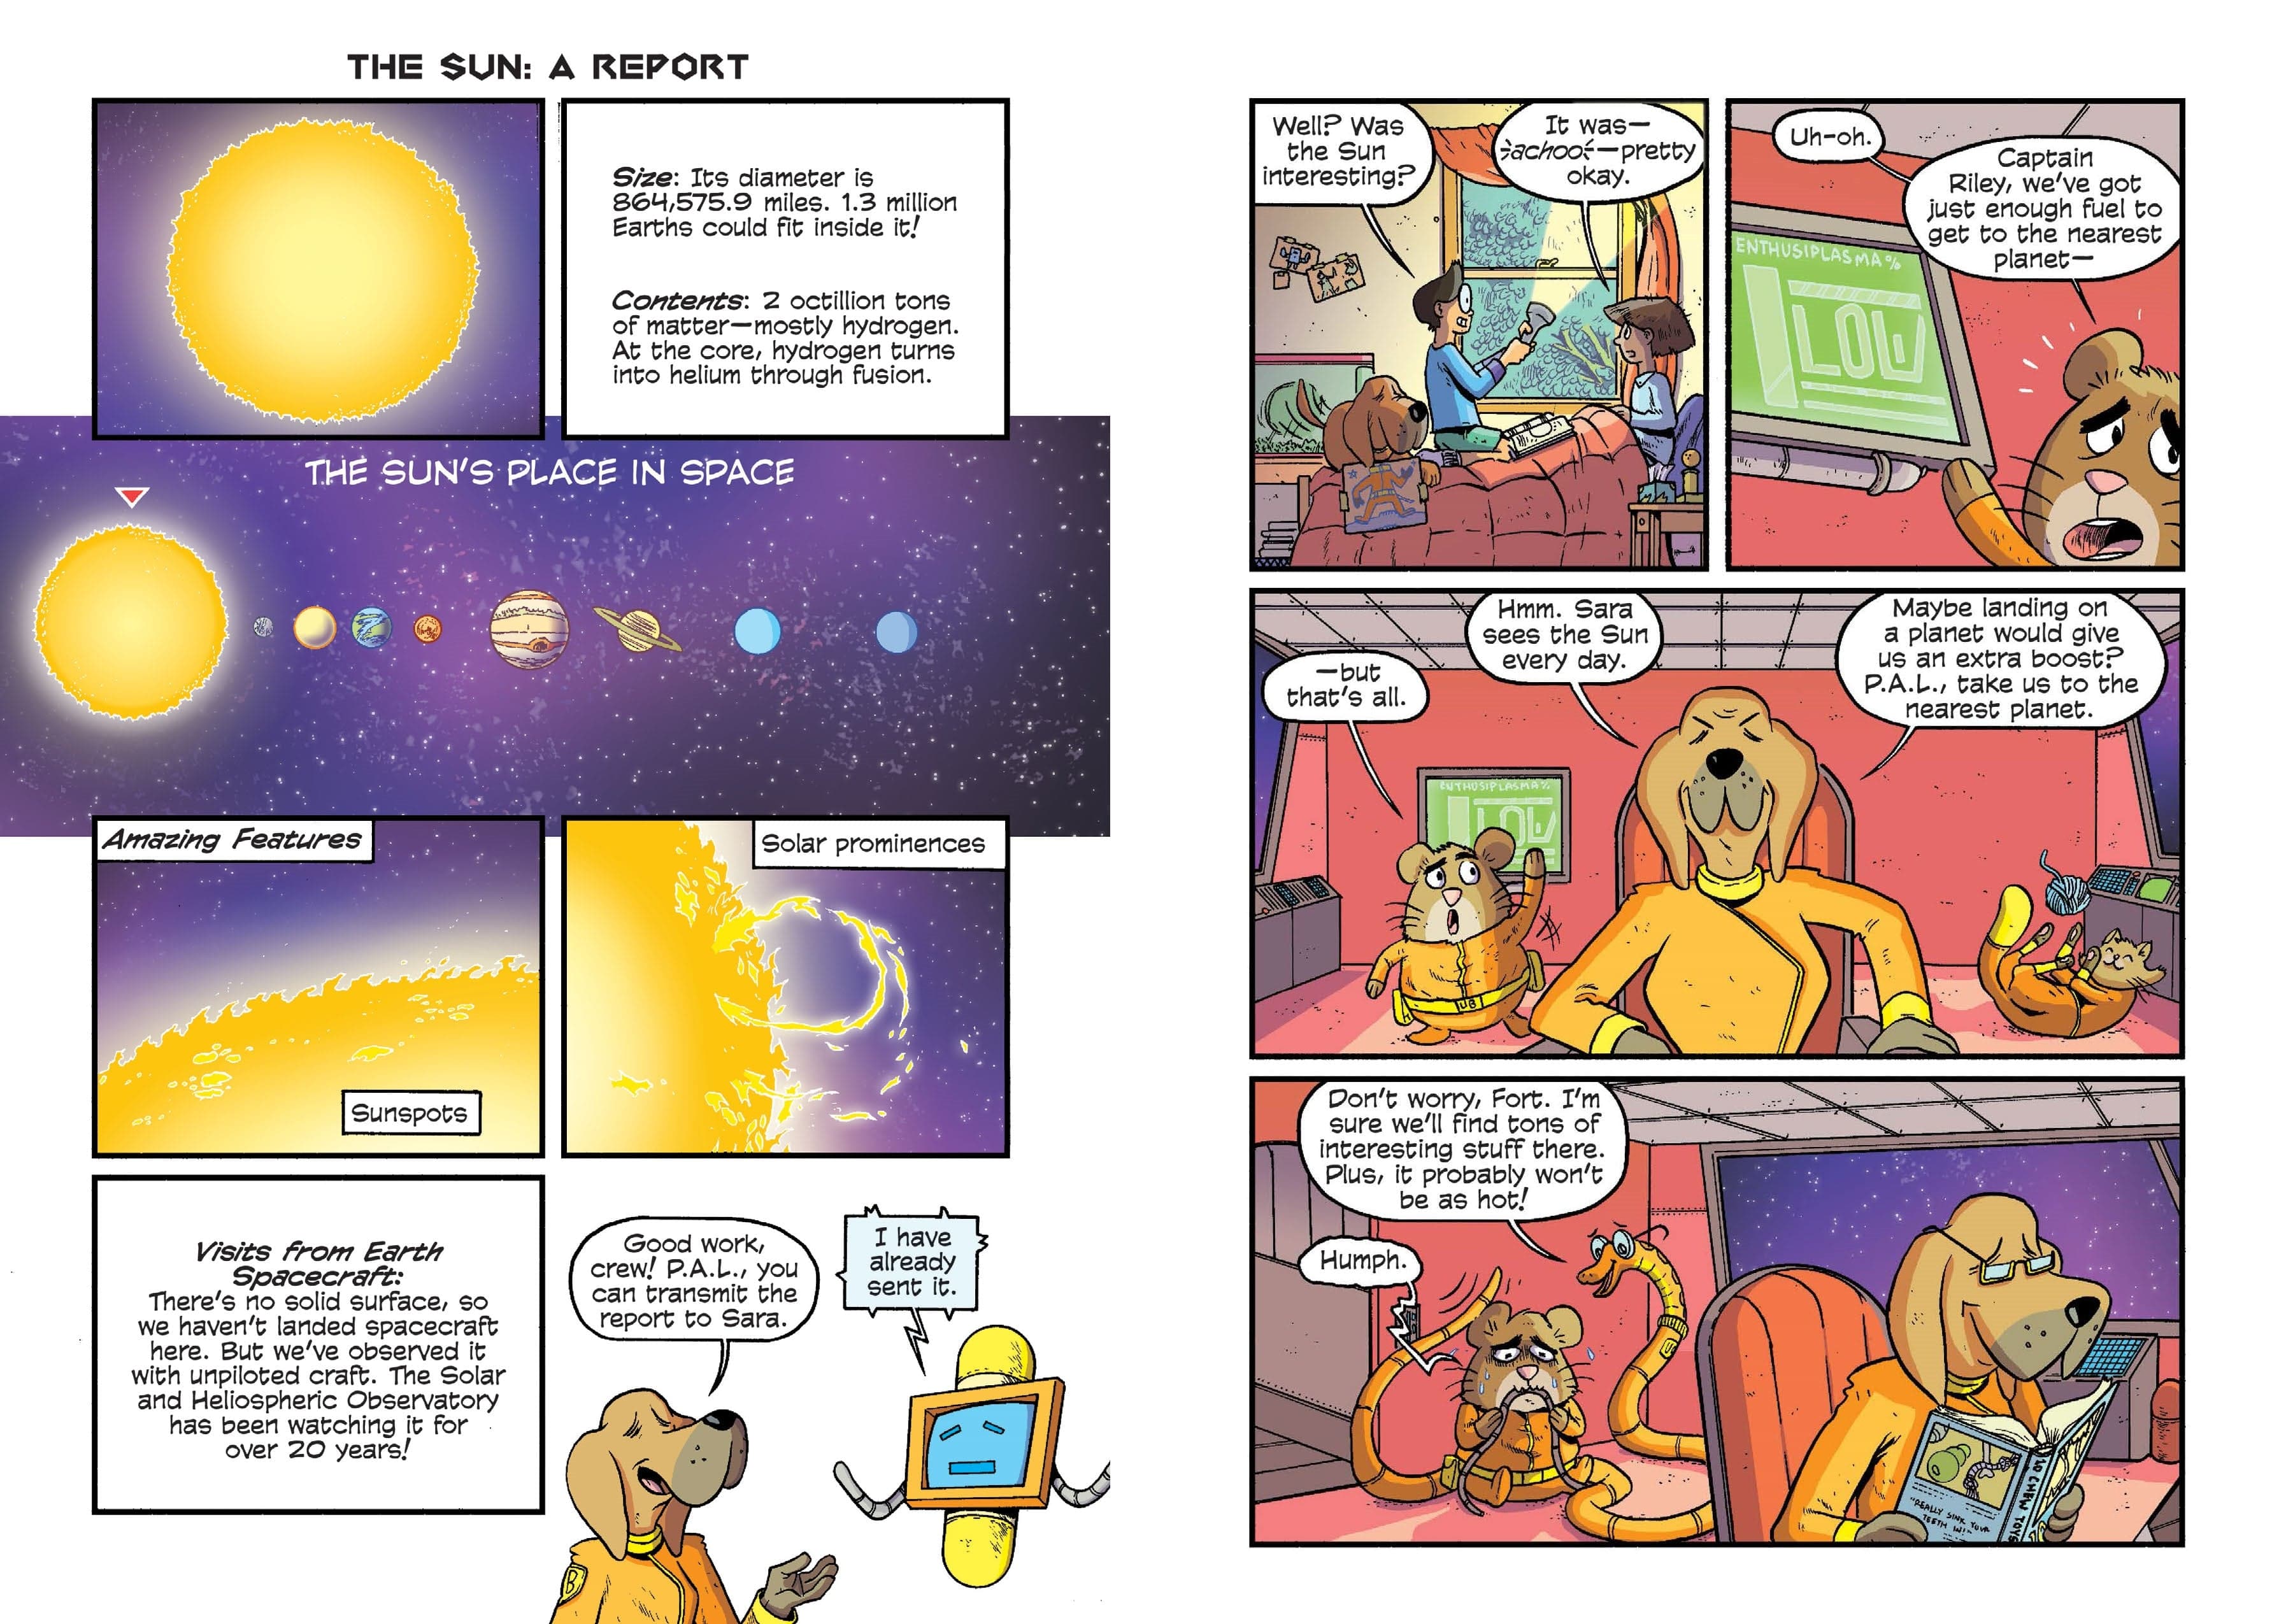 Science Comics - Solar System Our Place in Space